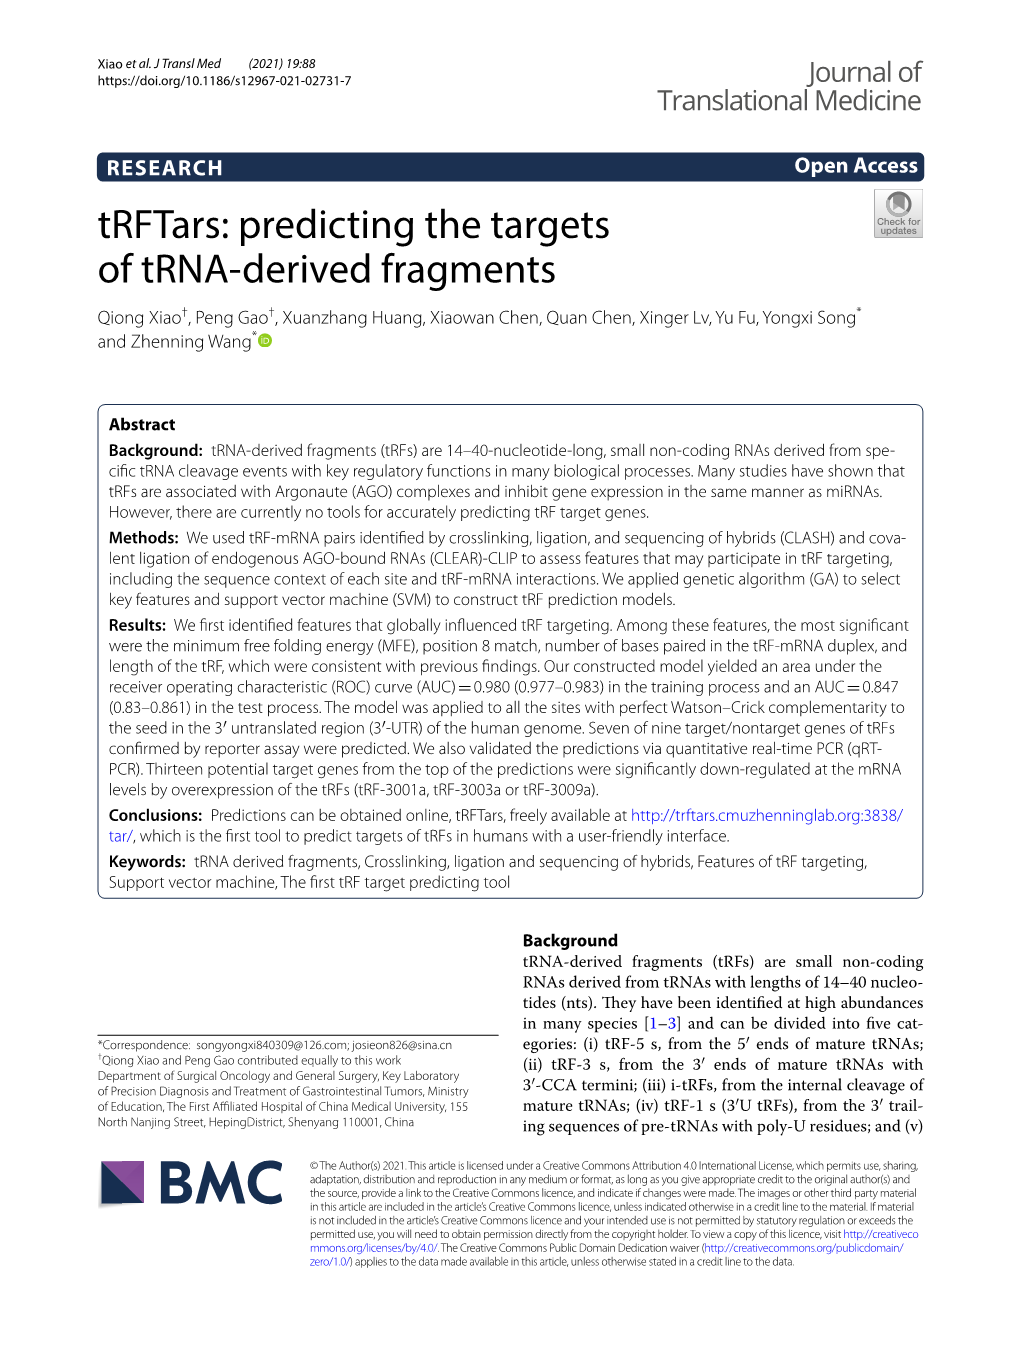 Trftars: Predicting the Targets of Trna-Derived Fragments